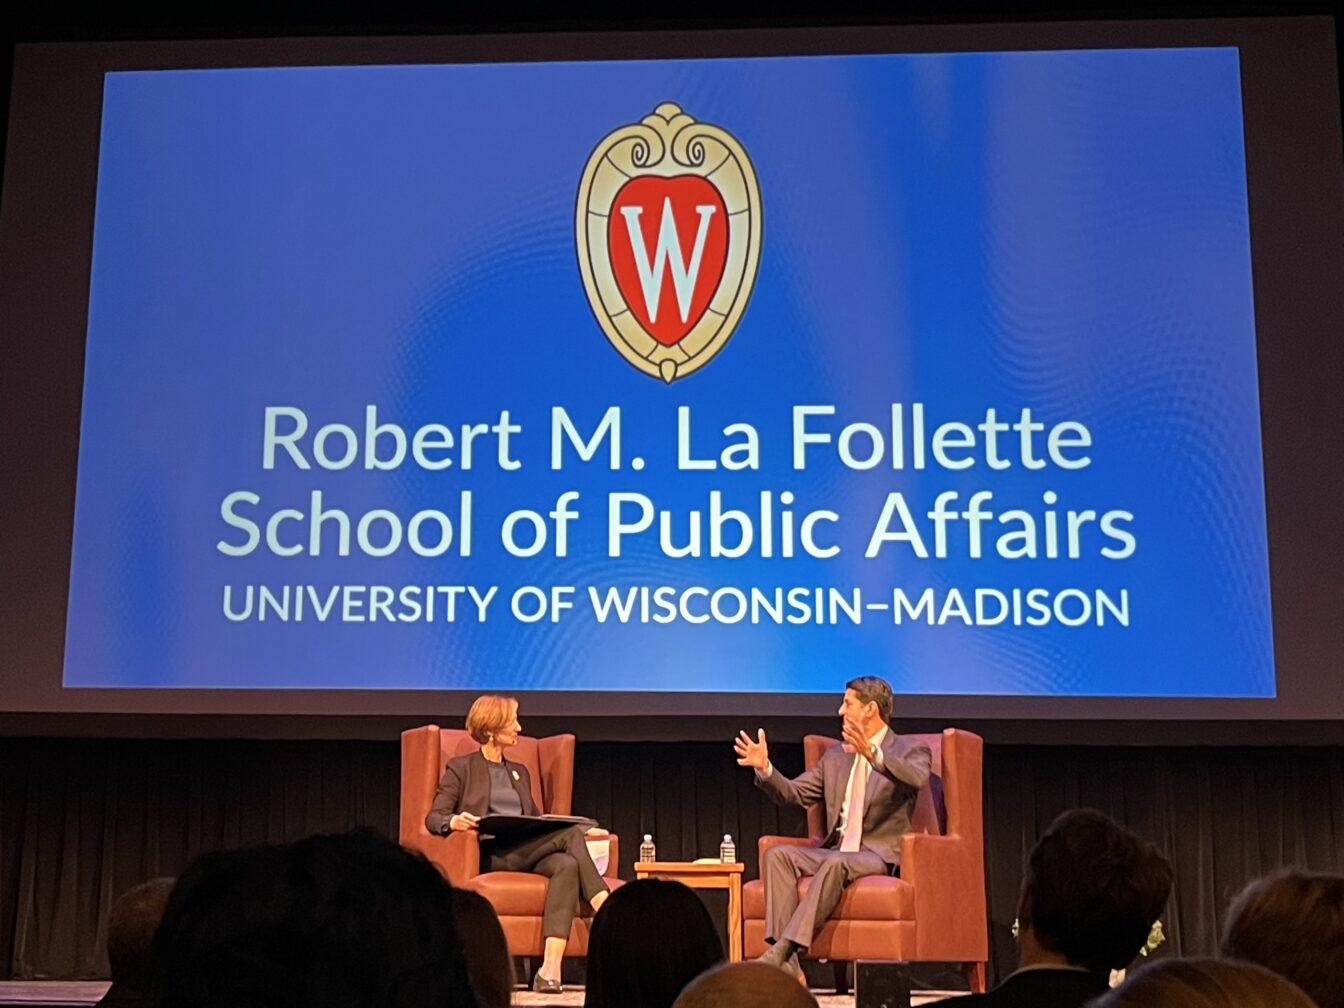 Former+Speaker+Paul+Ryan+visits+UW+to+discuss+public+policy